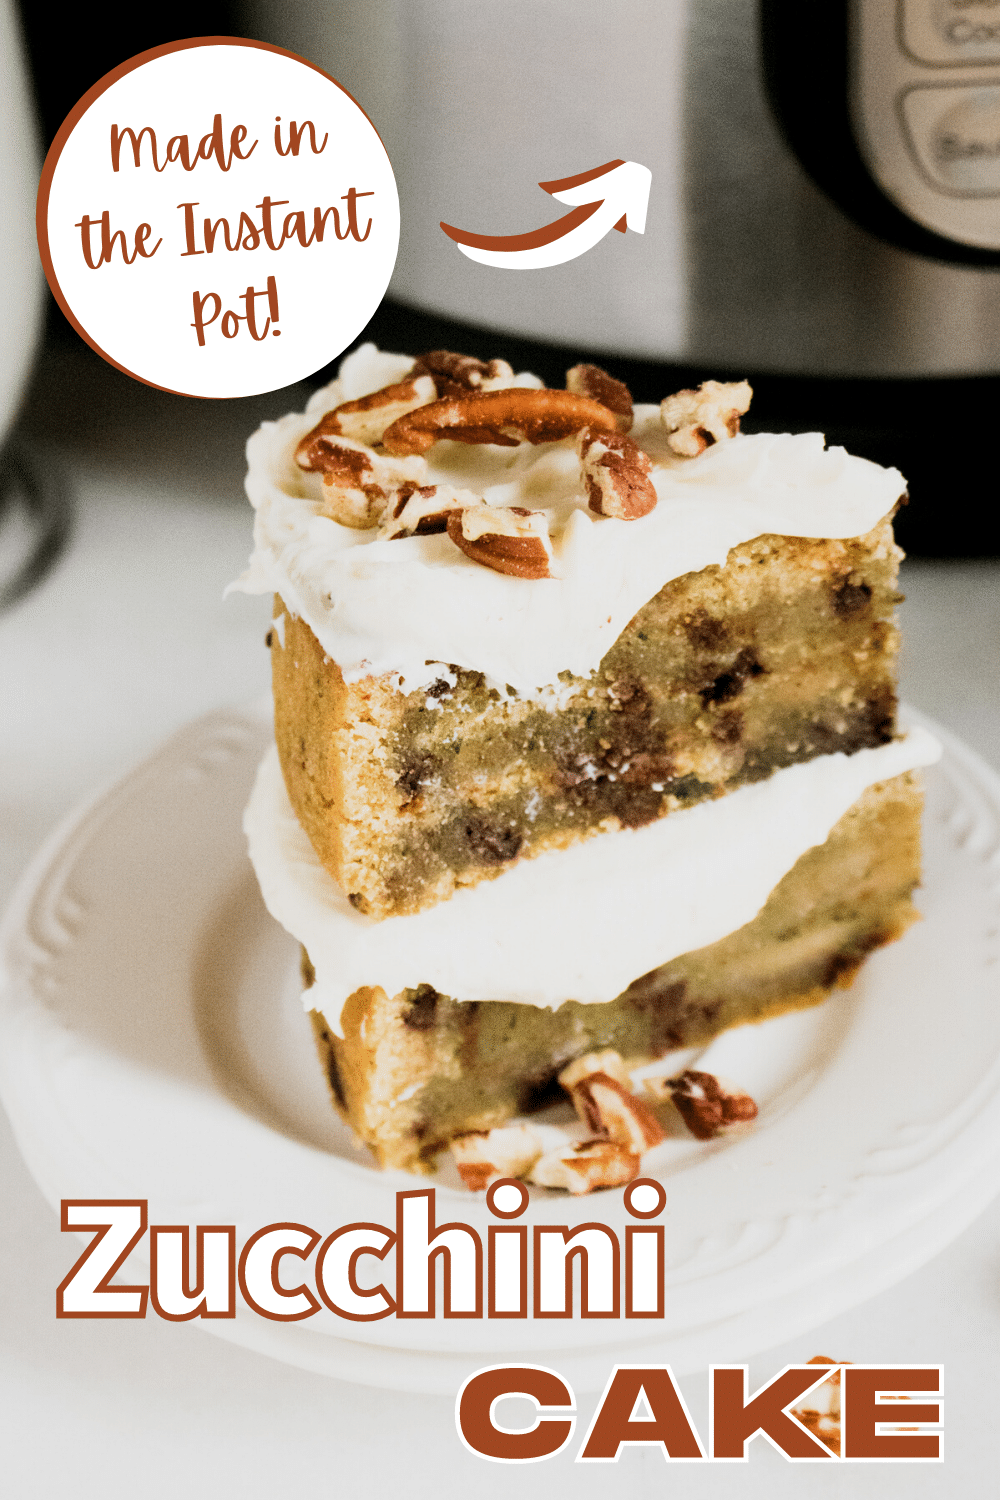 Instant Pot Zucchini Bread is the best zucchini bread I've ever tried. This bread is soft, and full of sweet cinnamon and zucchini flavor. #instantpot #pressurecooker #zucchinibread #recipe via @wondermomwannab